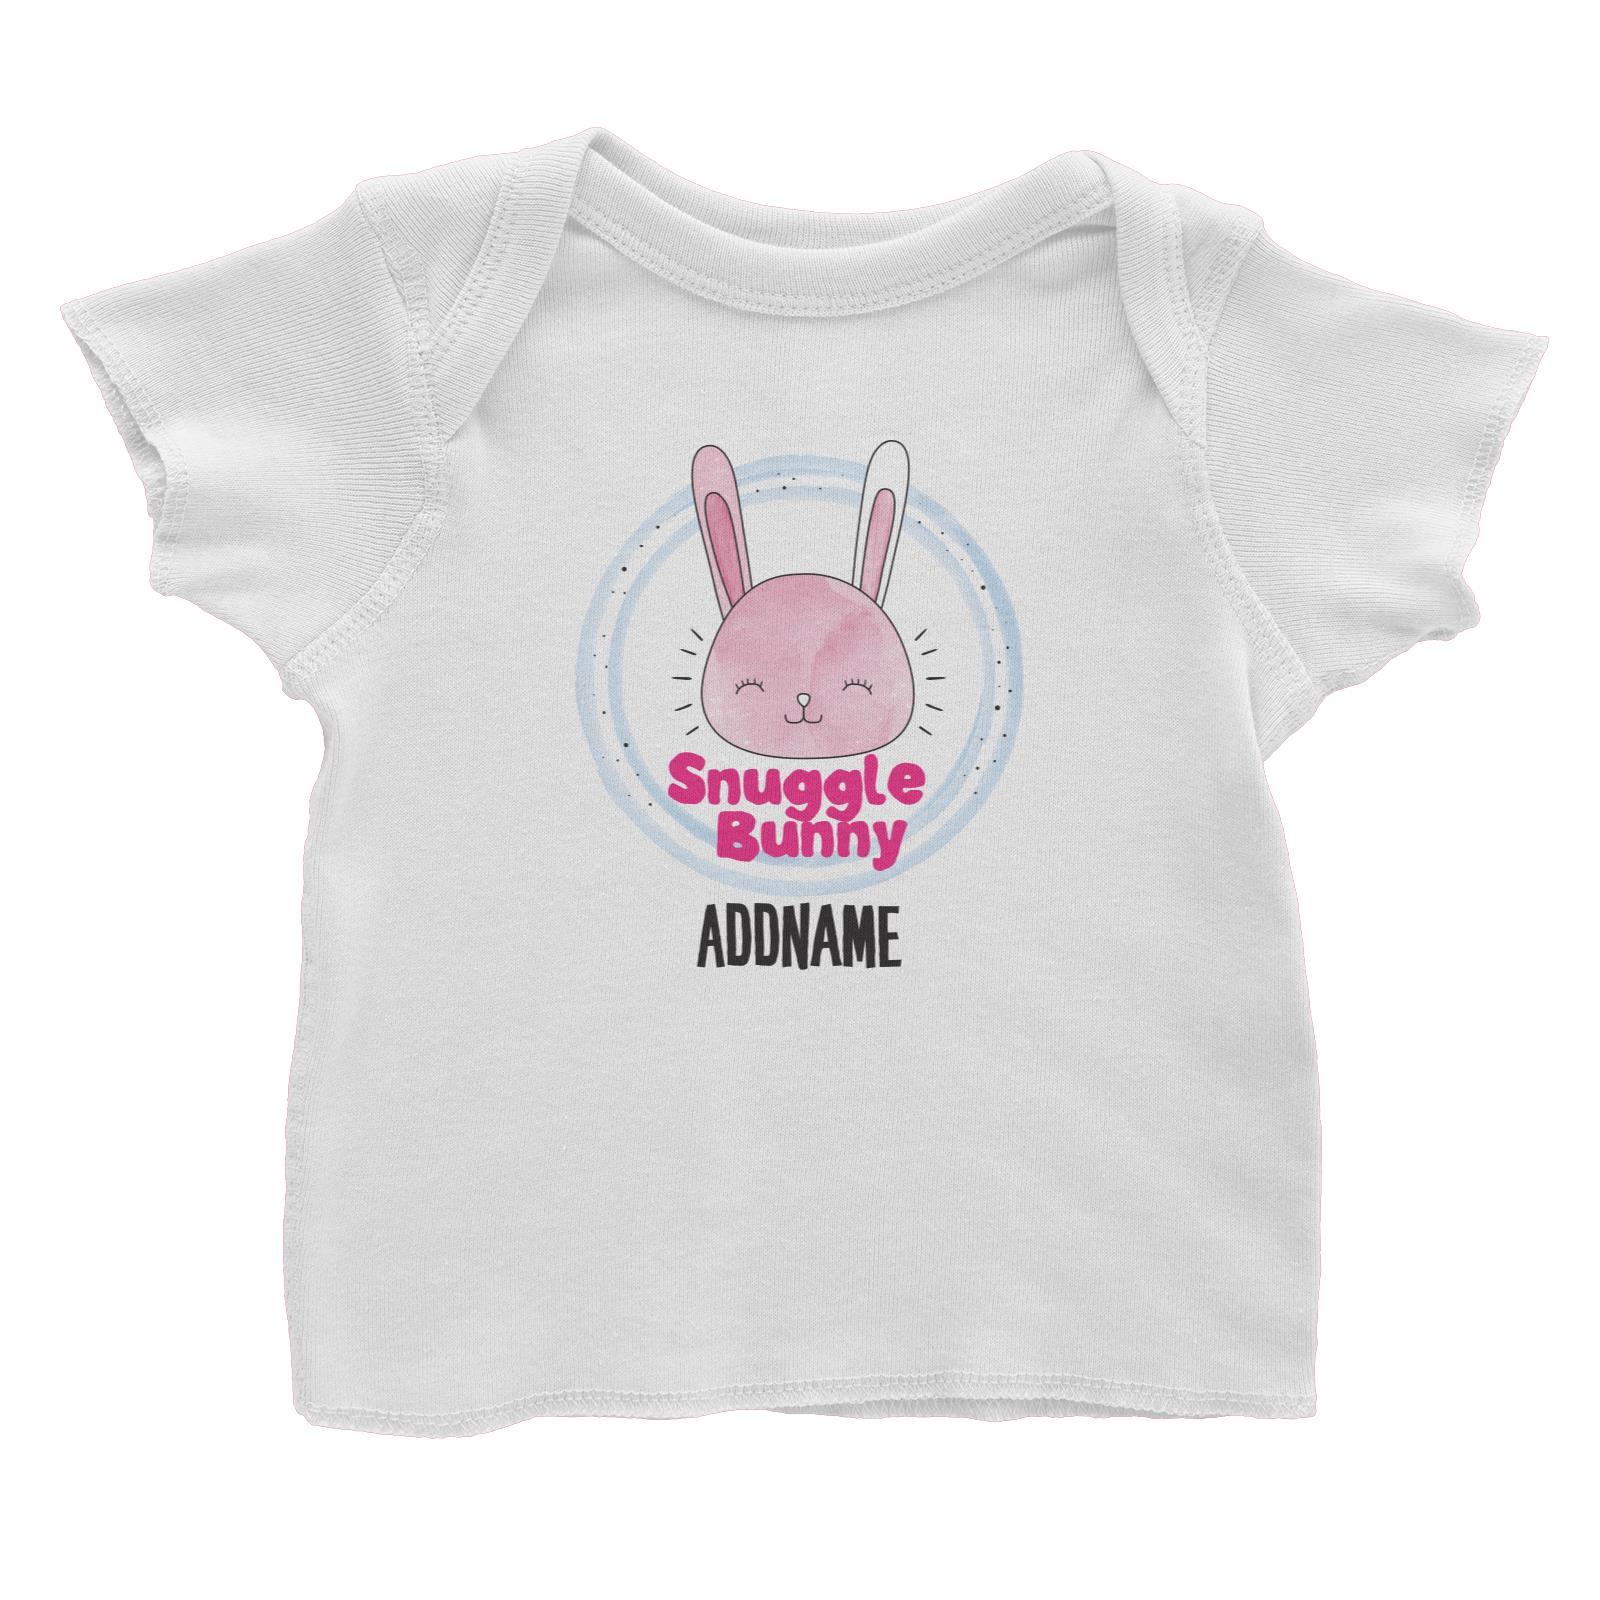 Cool Vibrant Series Snuggle Bunny Addname Baby T-Shirt